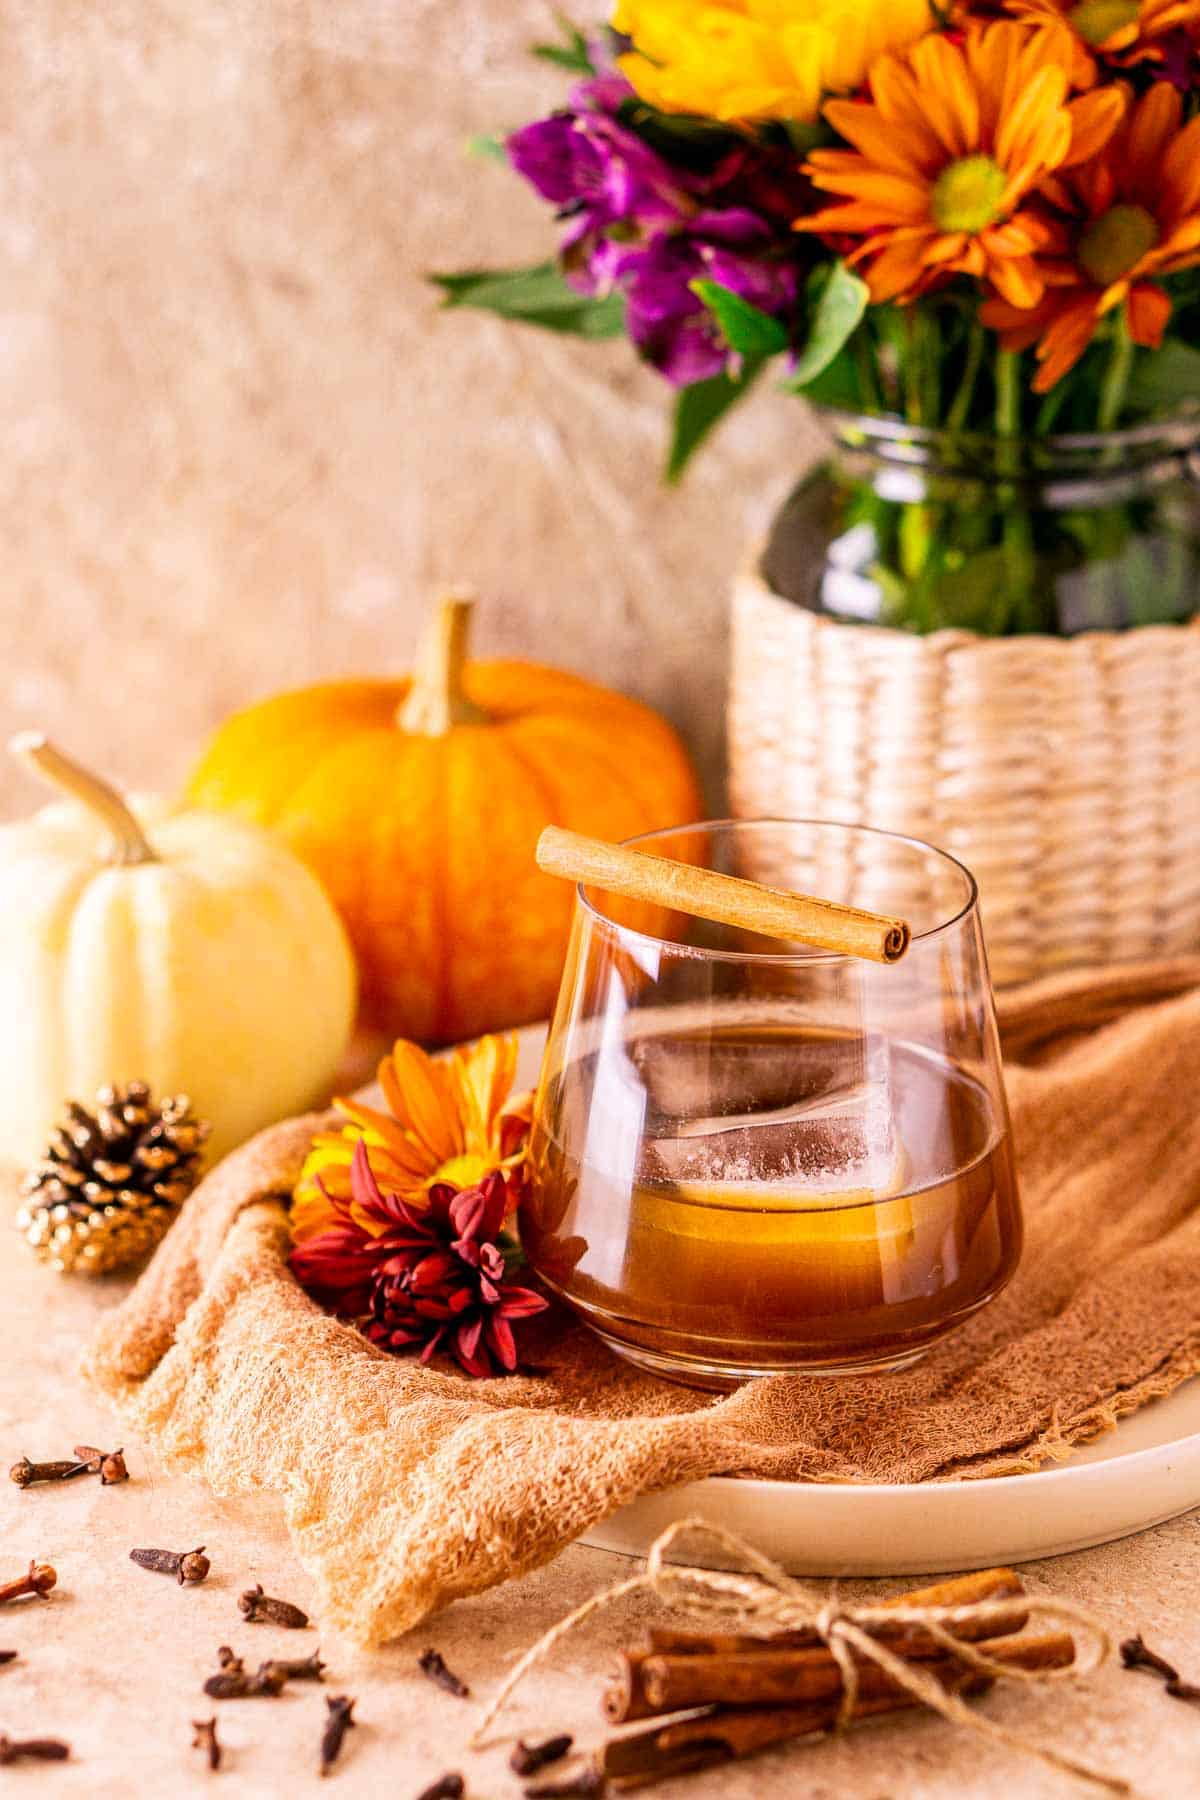 A spiced pumpkin old fashioned on a cream-colored cloth with spices around it and a vase of fall flowers in the background.